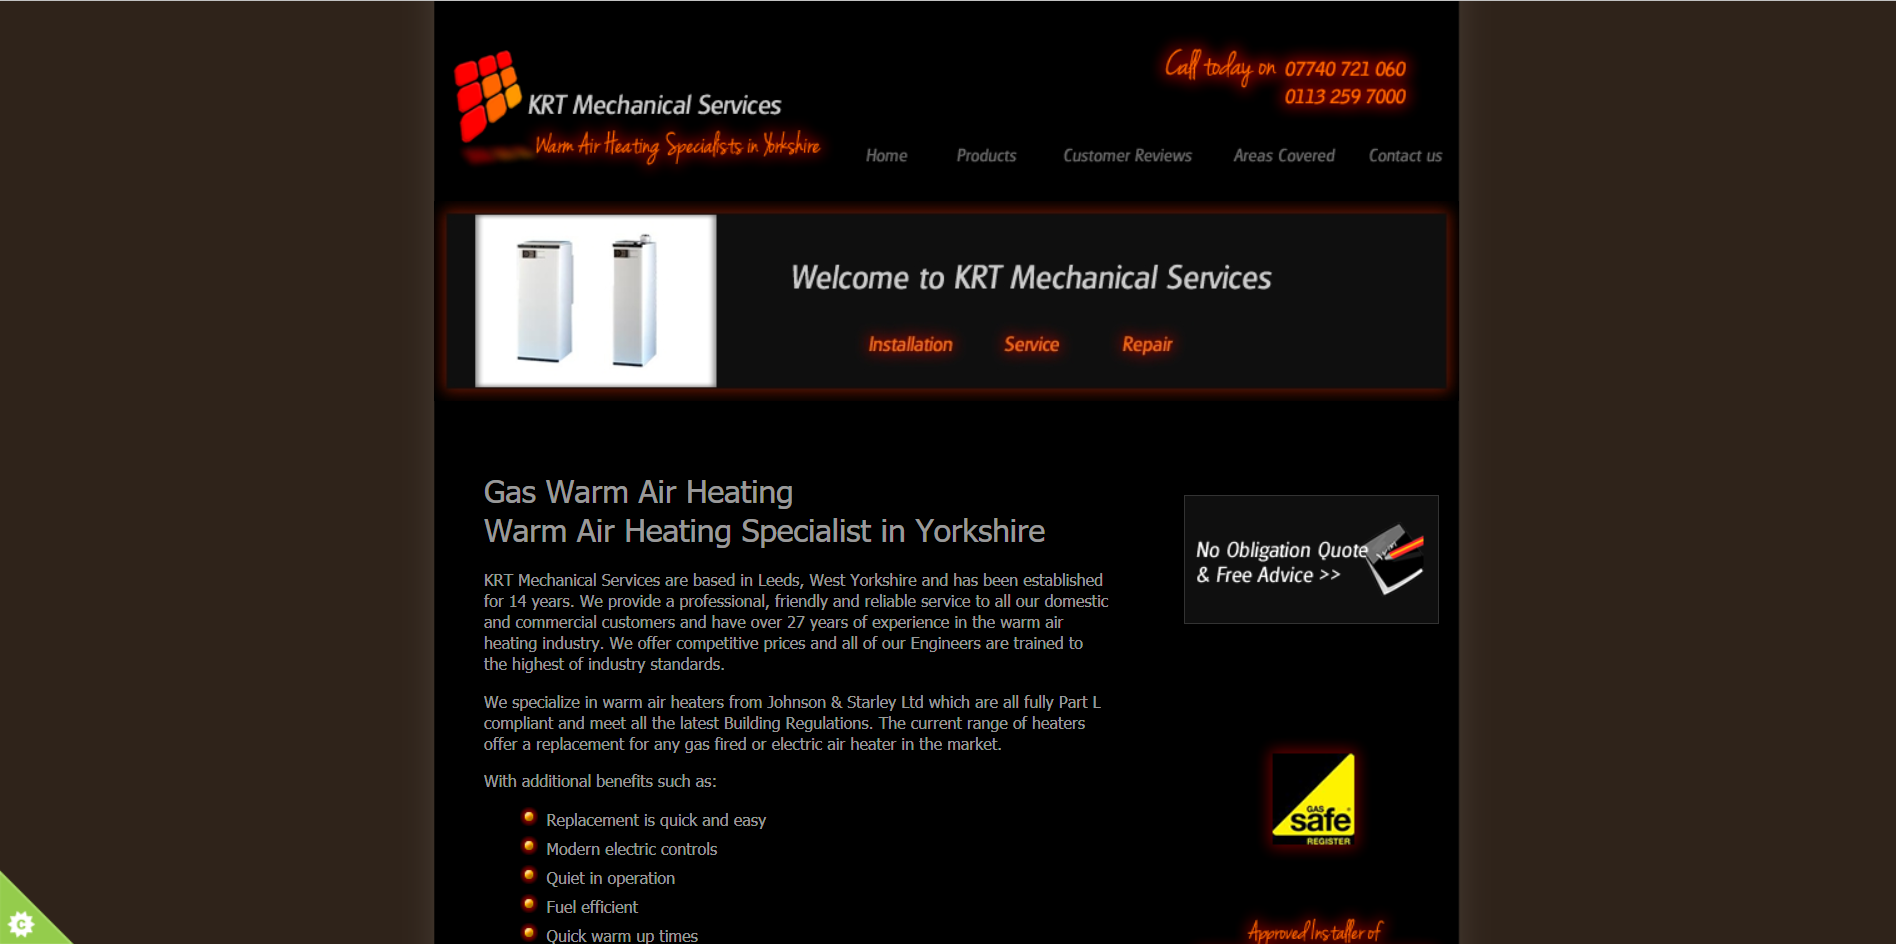 Sample of the design work on the KRT Mechanical Services website